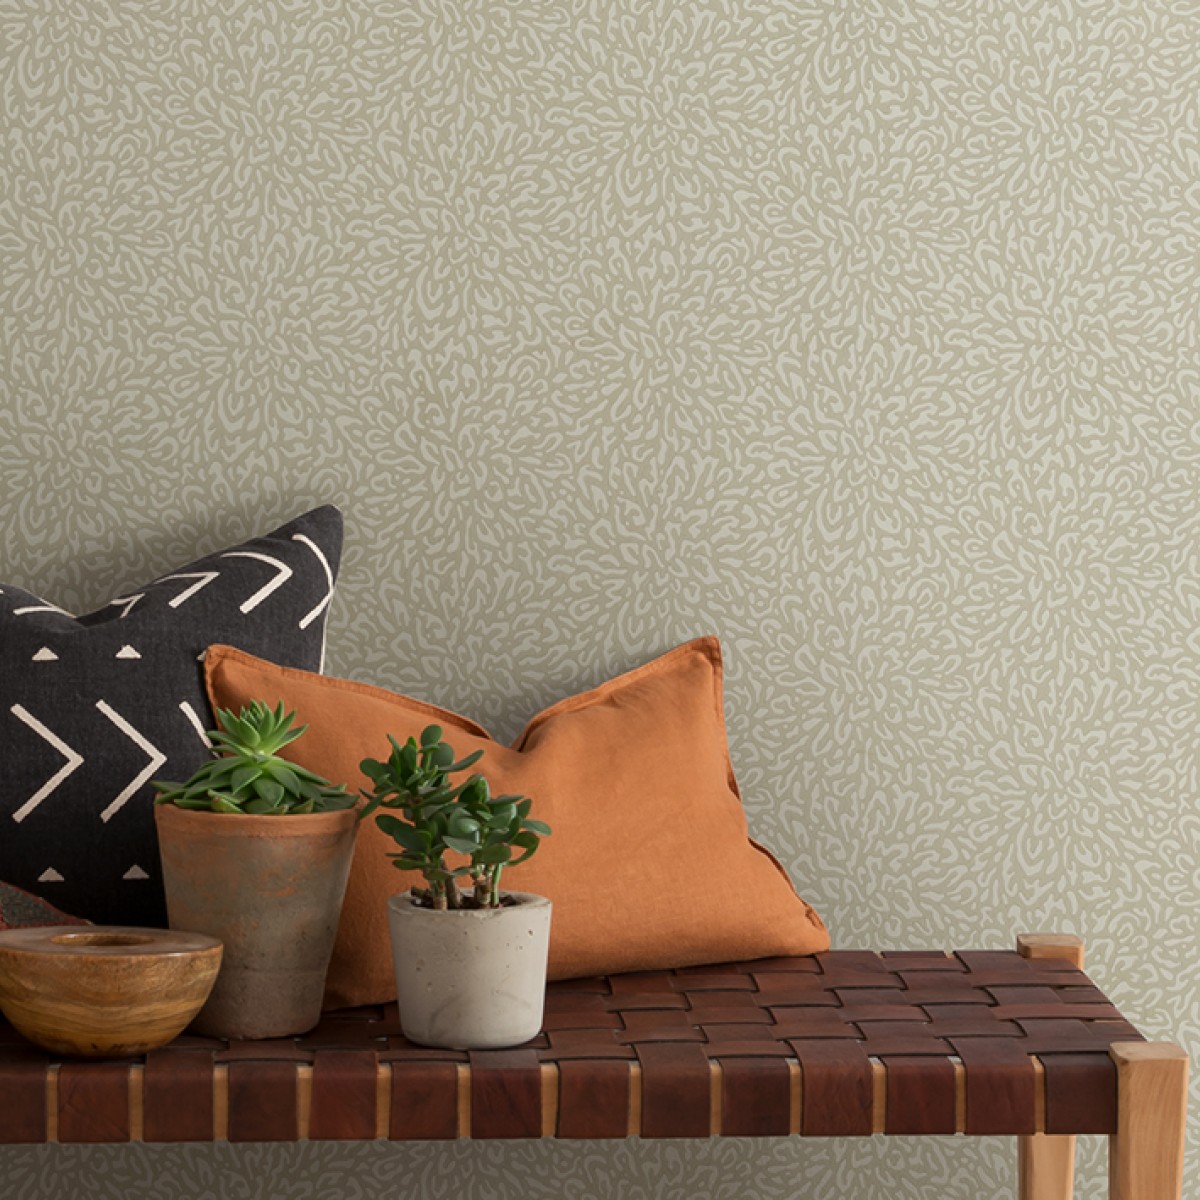 Tapet Corallo, Sandstone Neutral Luxury Patterned, 1838 Wallcoverings, 5.3mp / rola, Tapet living 